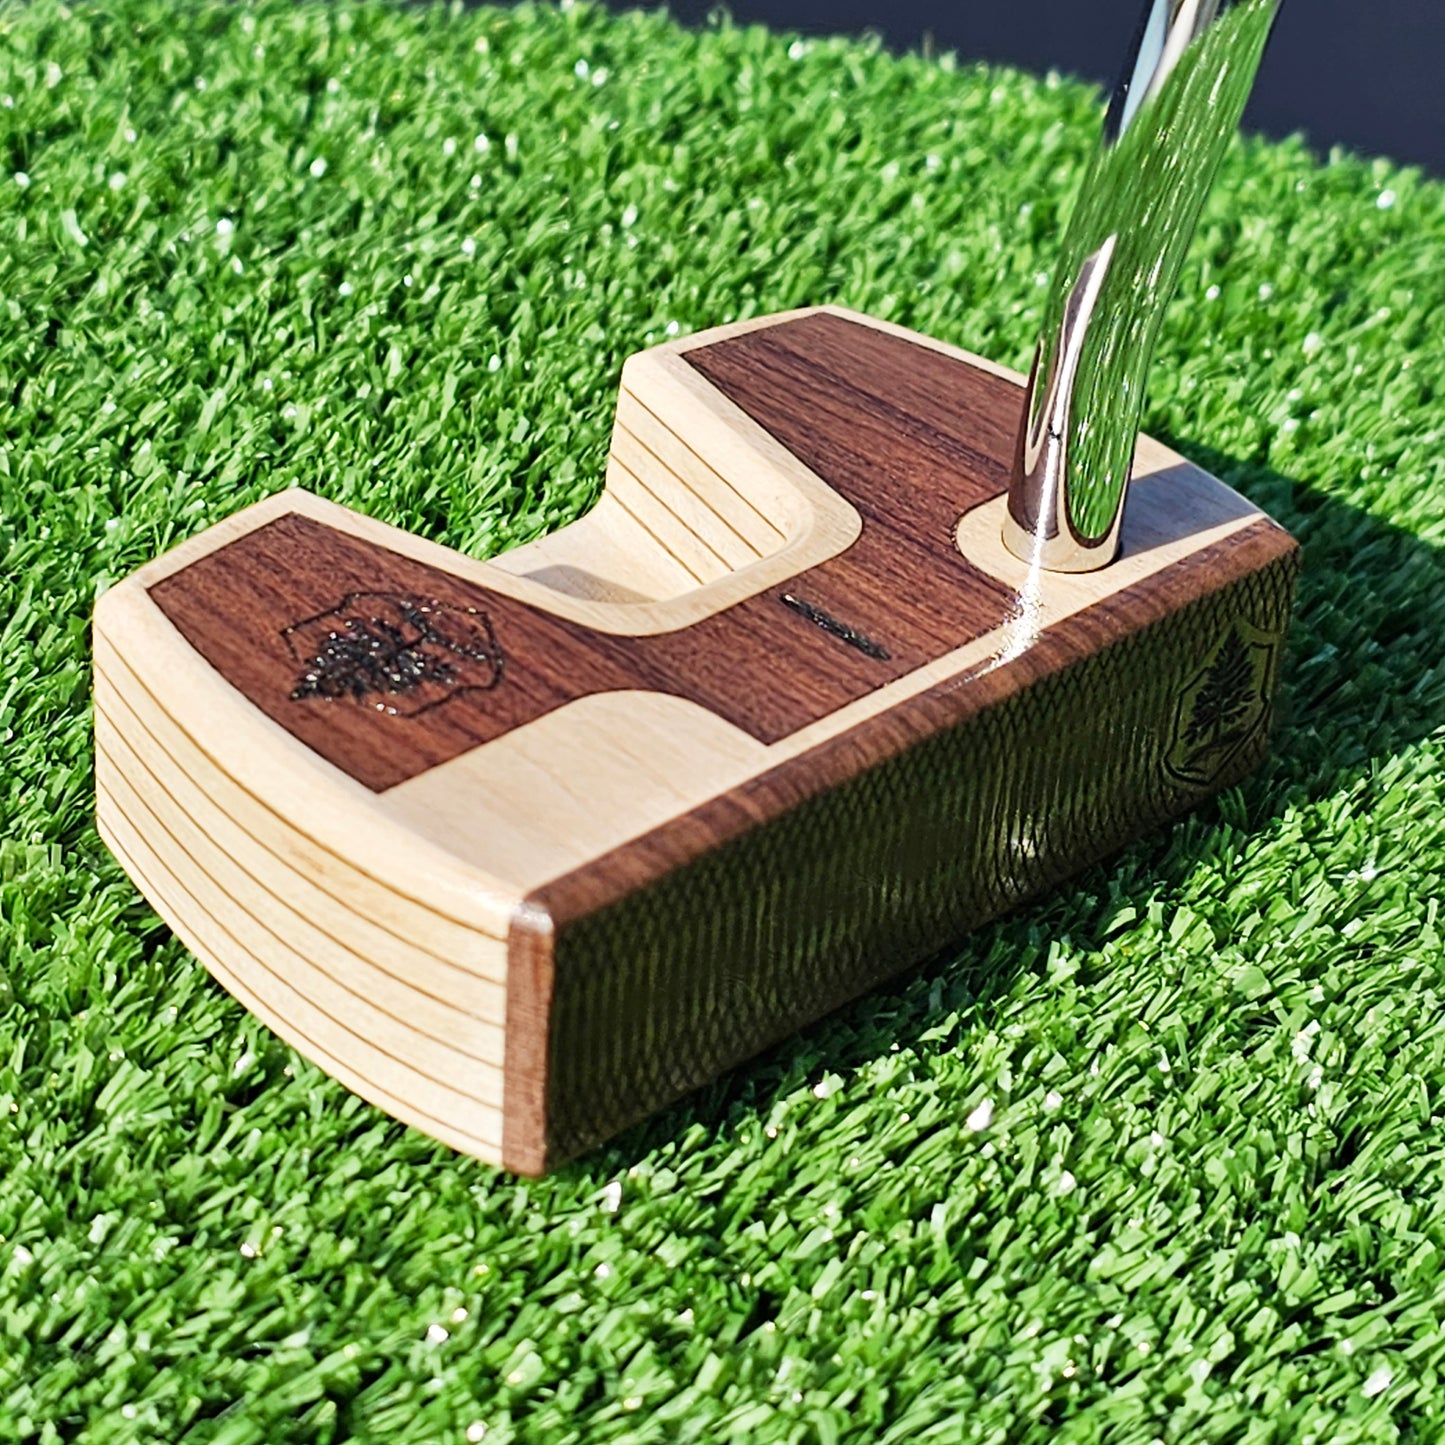 Bolivian Rosewood and Maple body Woodrich Regal wood putter